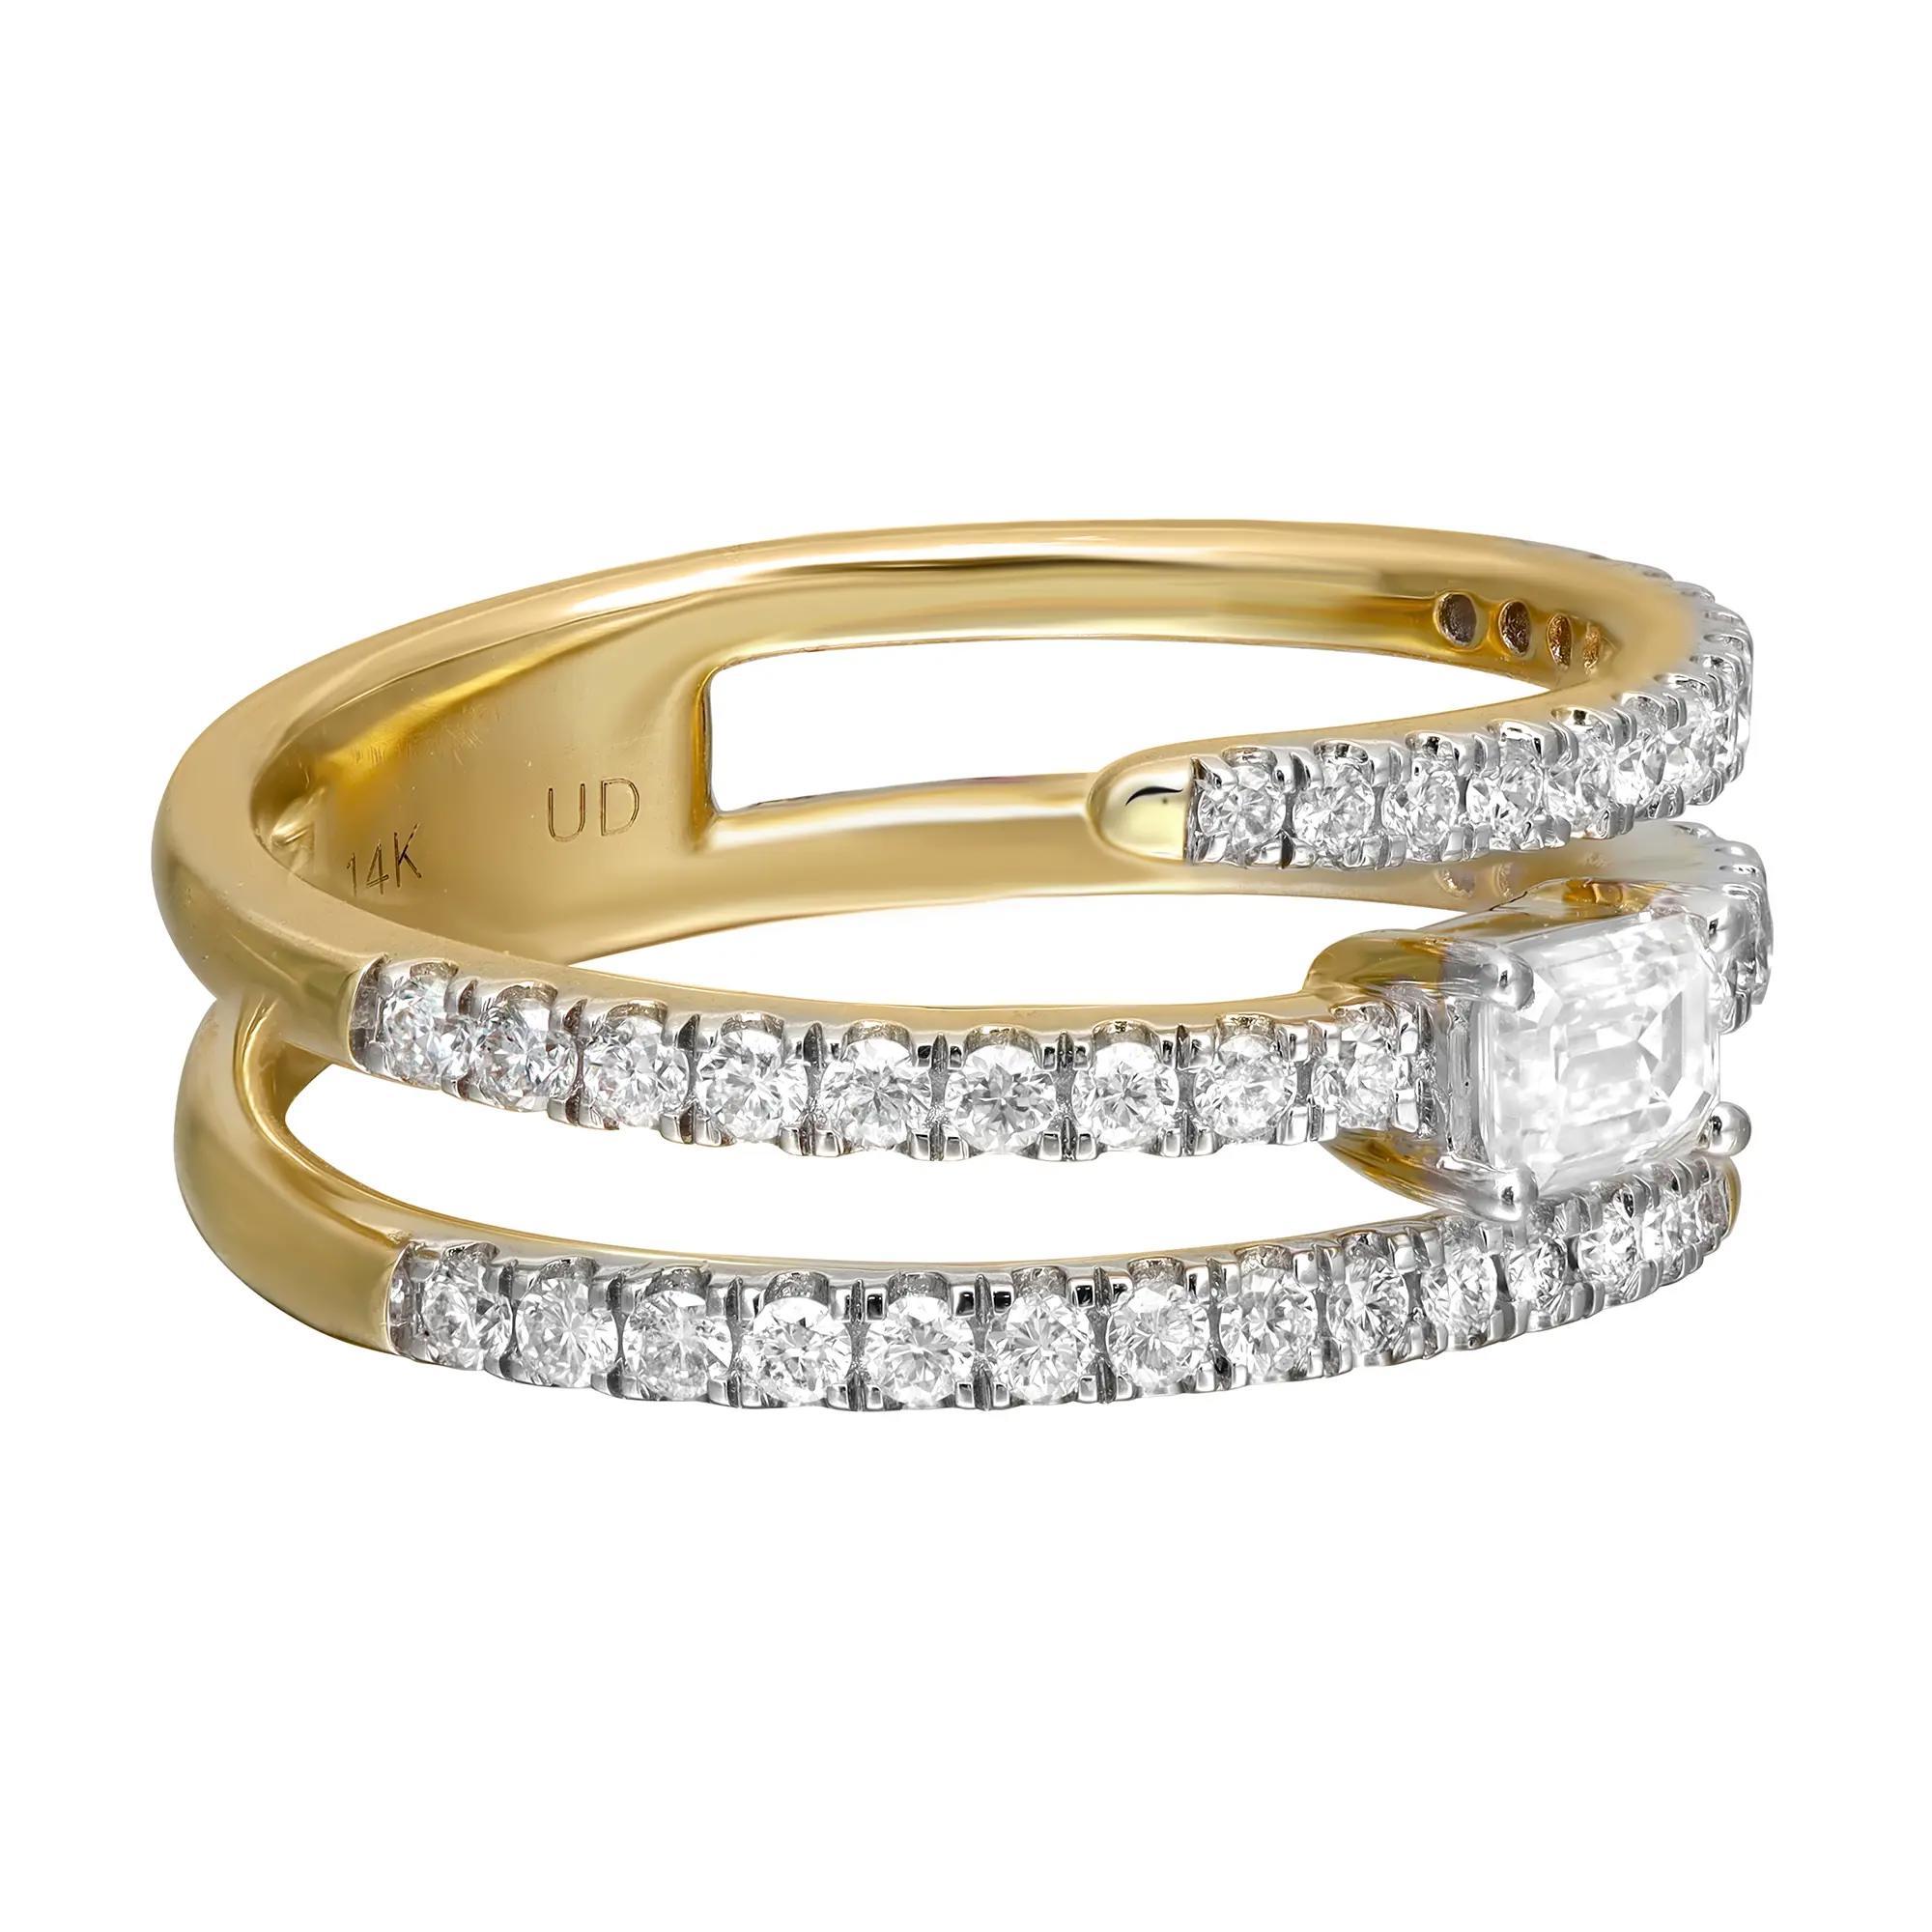 This gorgeous spiral diamond ring is all about sparkle and glamour. Crafted in high polished 18k yellow gold. This style features three half rows of pave set round cut diamonds with a center baguette cut diamond in a prong setting. Total diamond